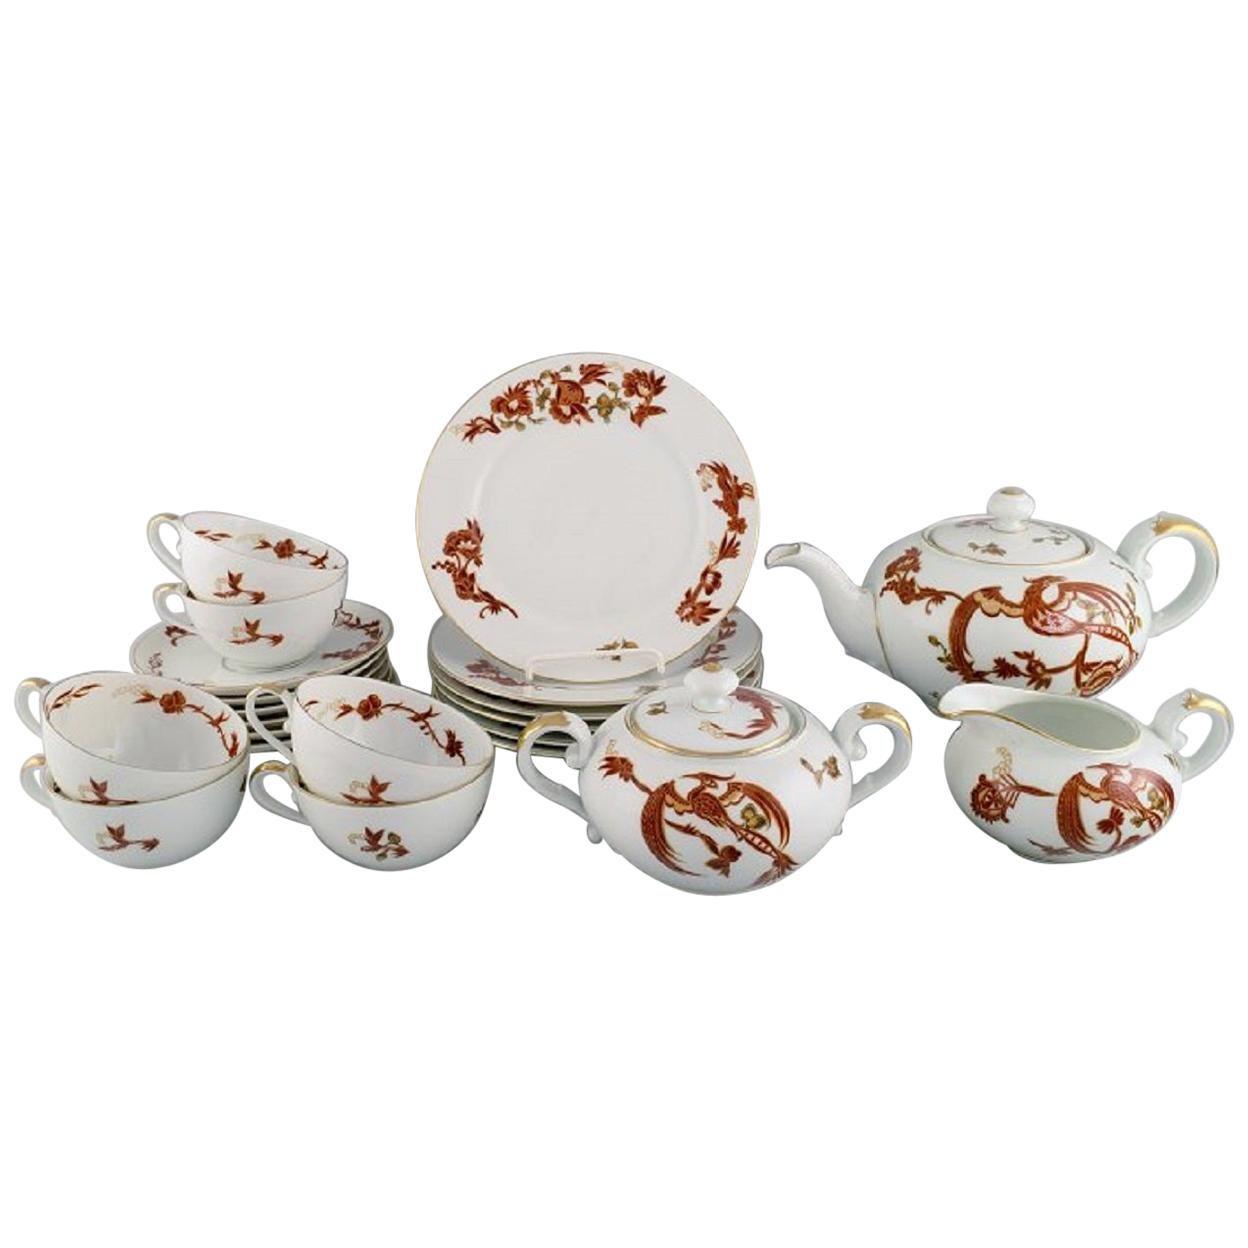 Rosenthal Elite Tea Service in Hand-Painted Porcelain for Six People, Japanism